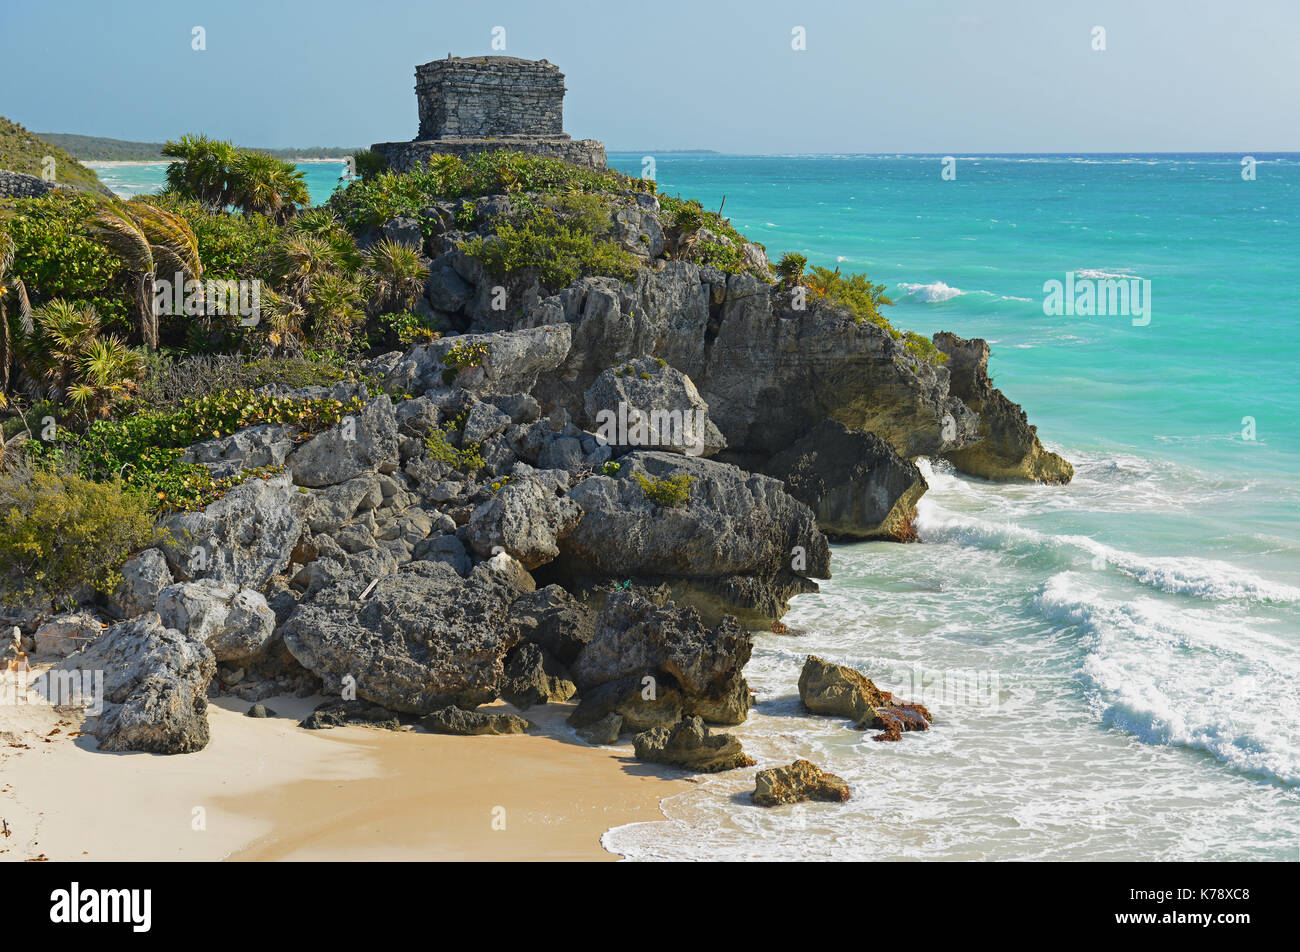 The God of Winds Maya temple with a white sand beach in Tulum on the Yucatan Peninsula in the state of Quintana Roo, Mexico. Stock Photo